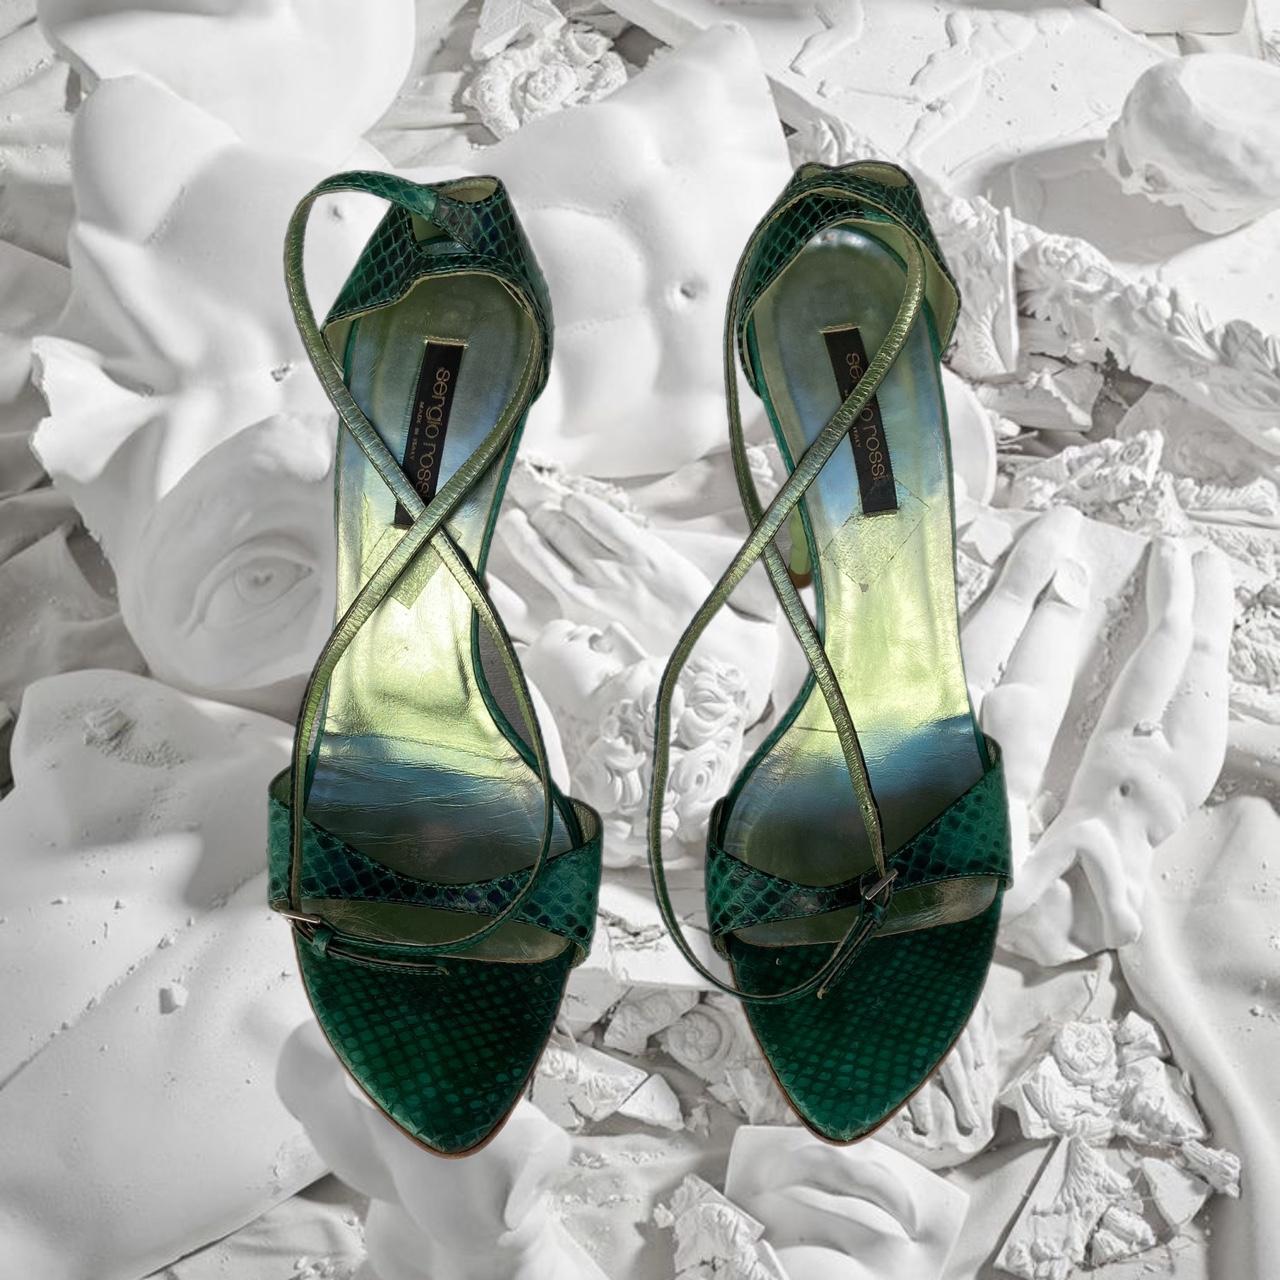 Sergio Rossi Women's Black and Green Sandals